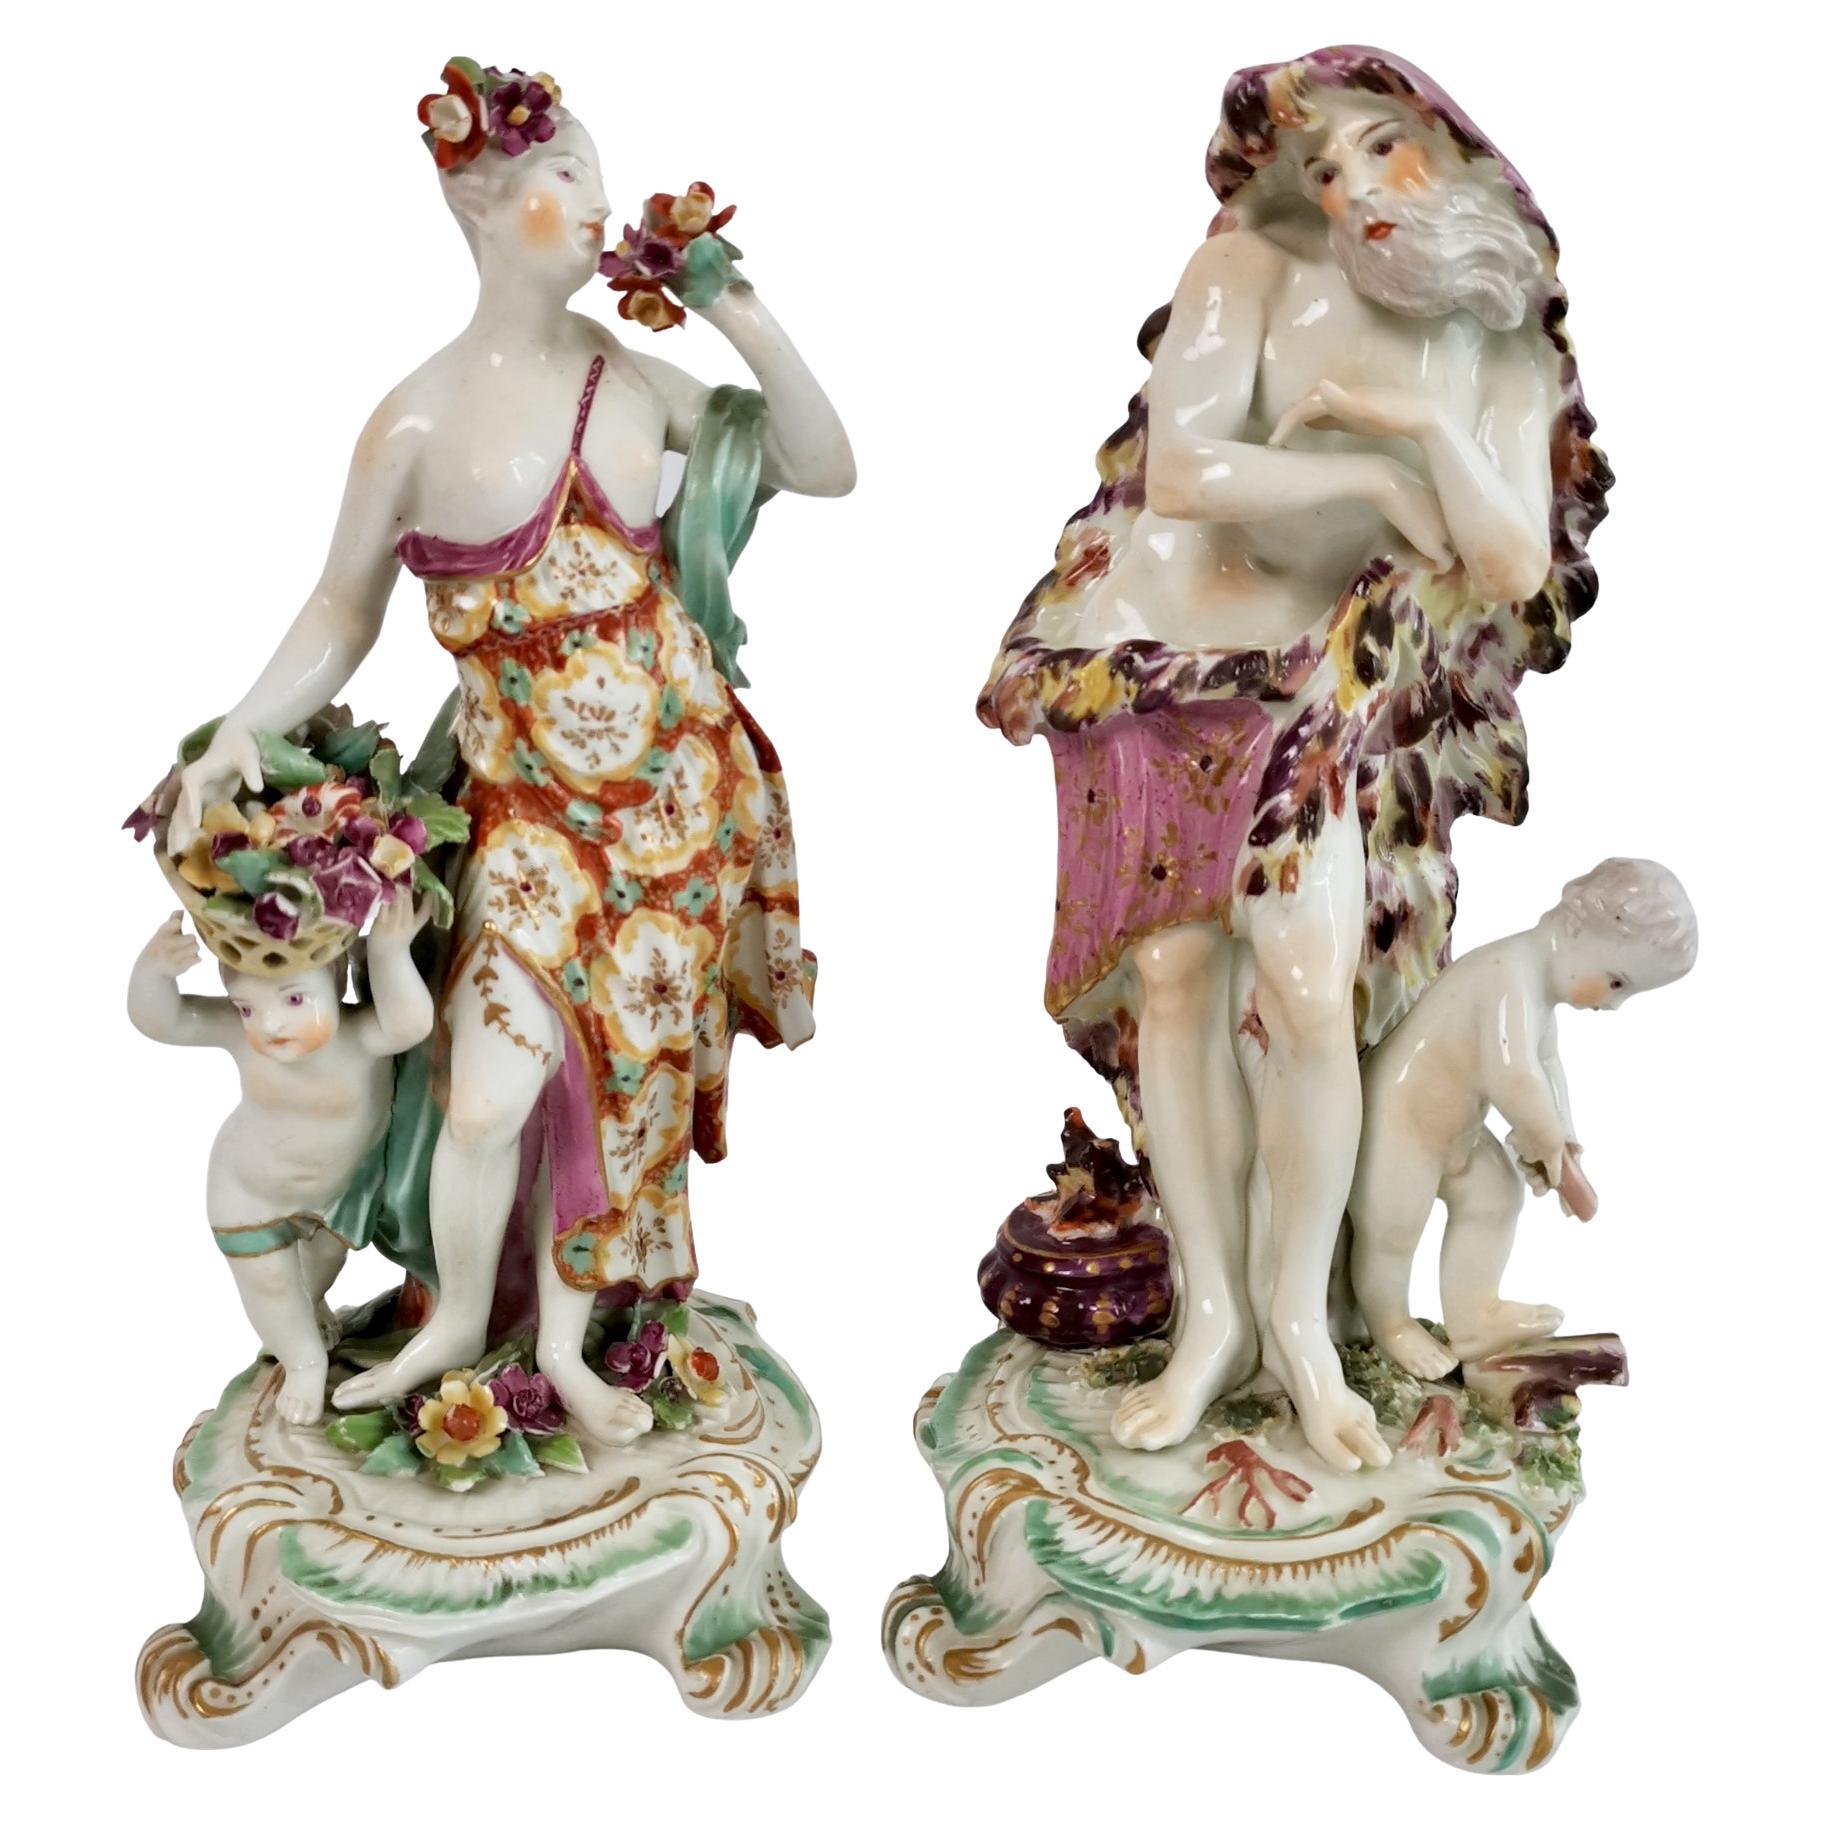 Derby Pair of Porcelain Figures of Winter and Spring, Rococo Period 1756-1759